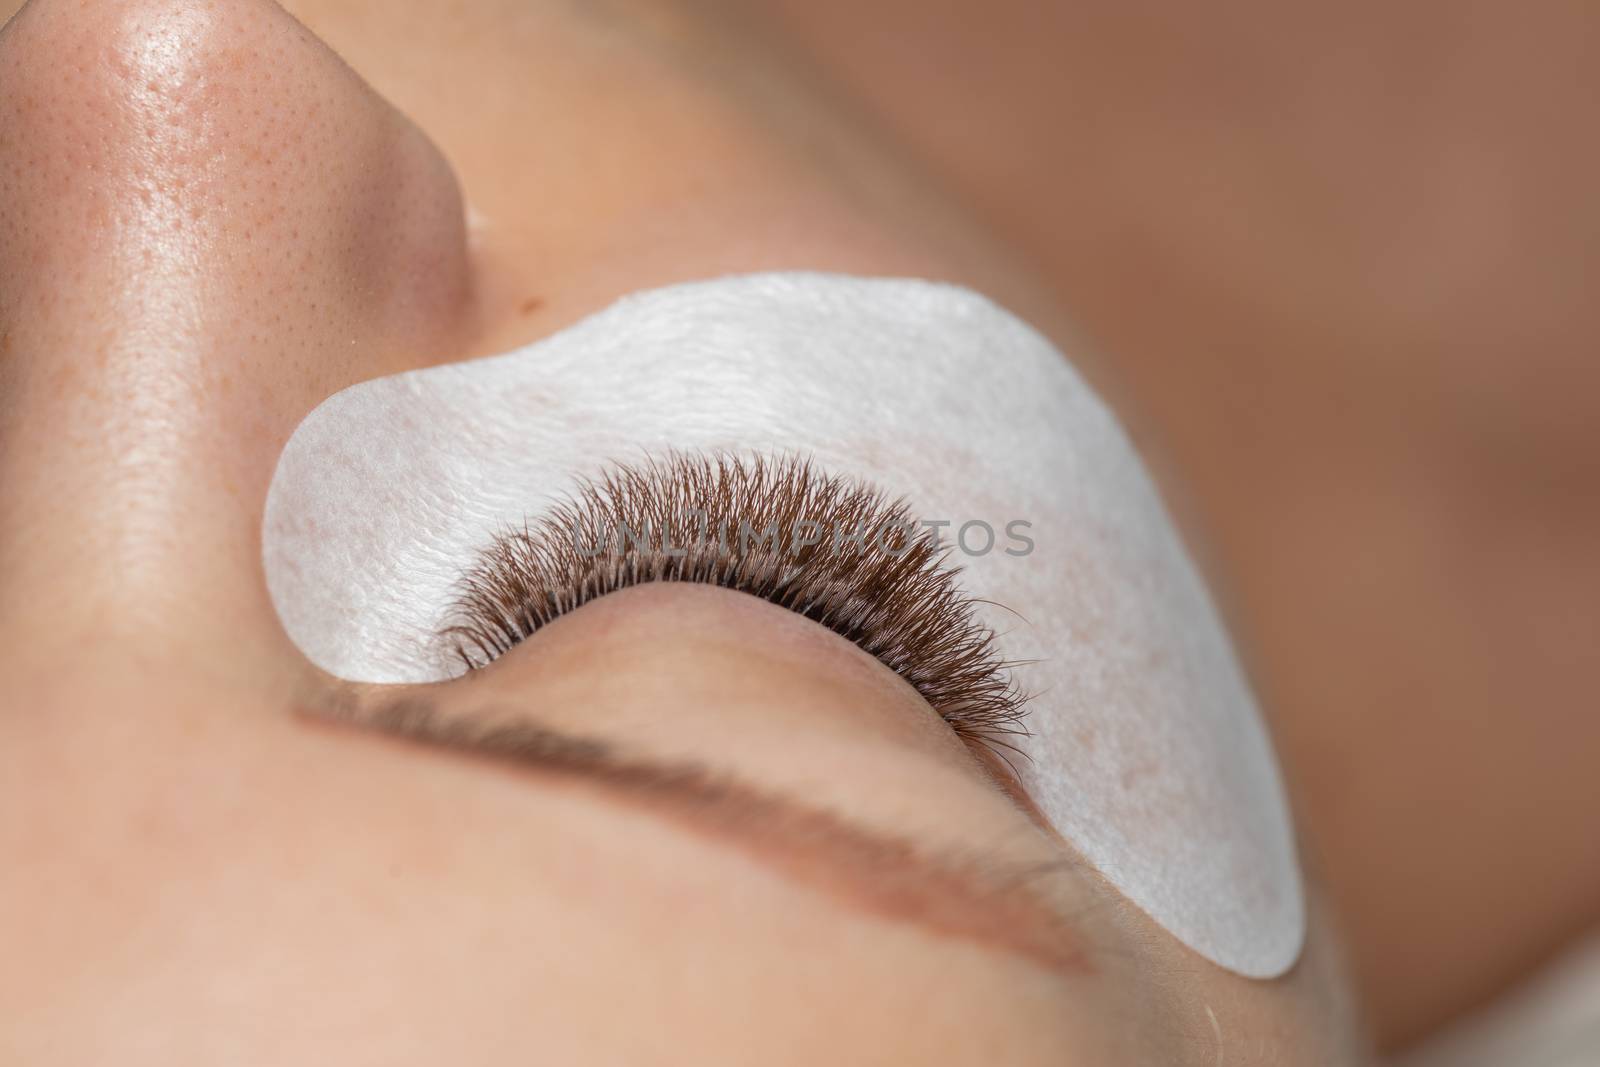 One Woman Eyes with Eyelashes Extension with eyepatch under eye  by adamr